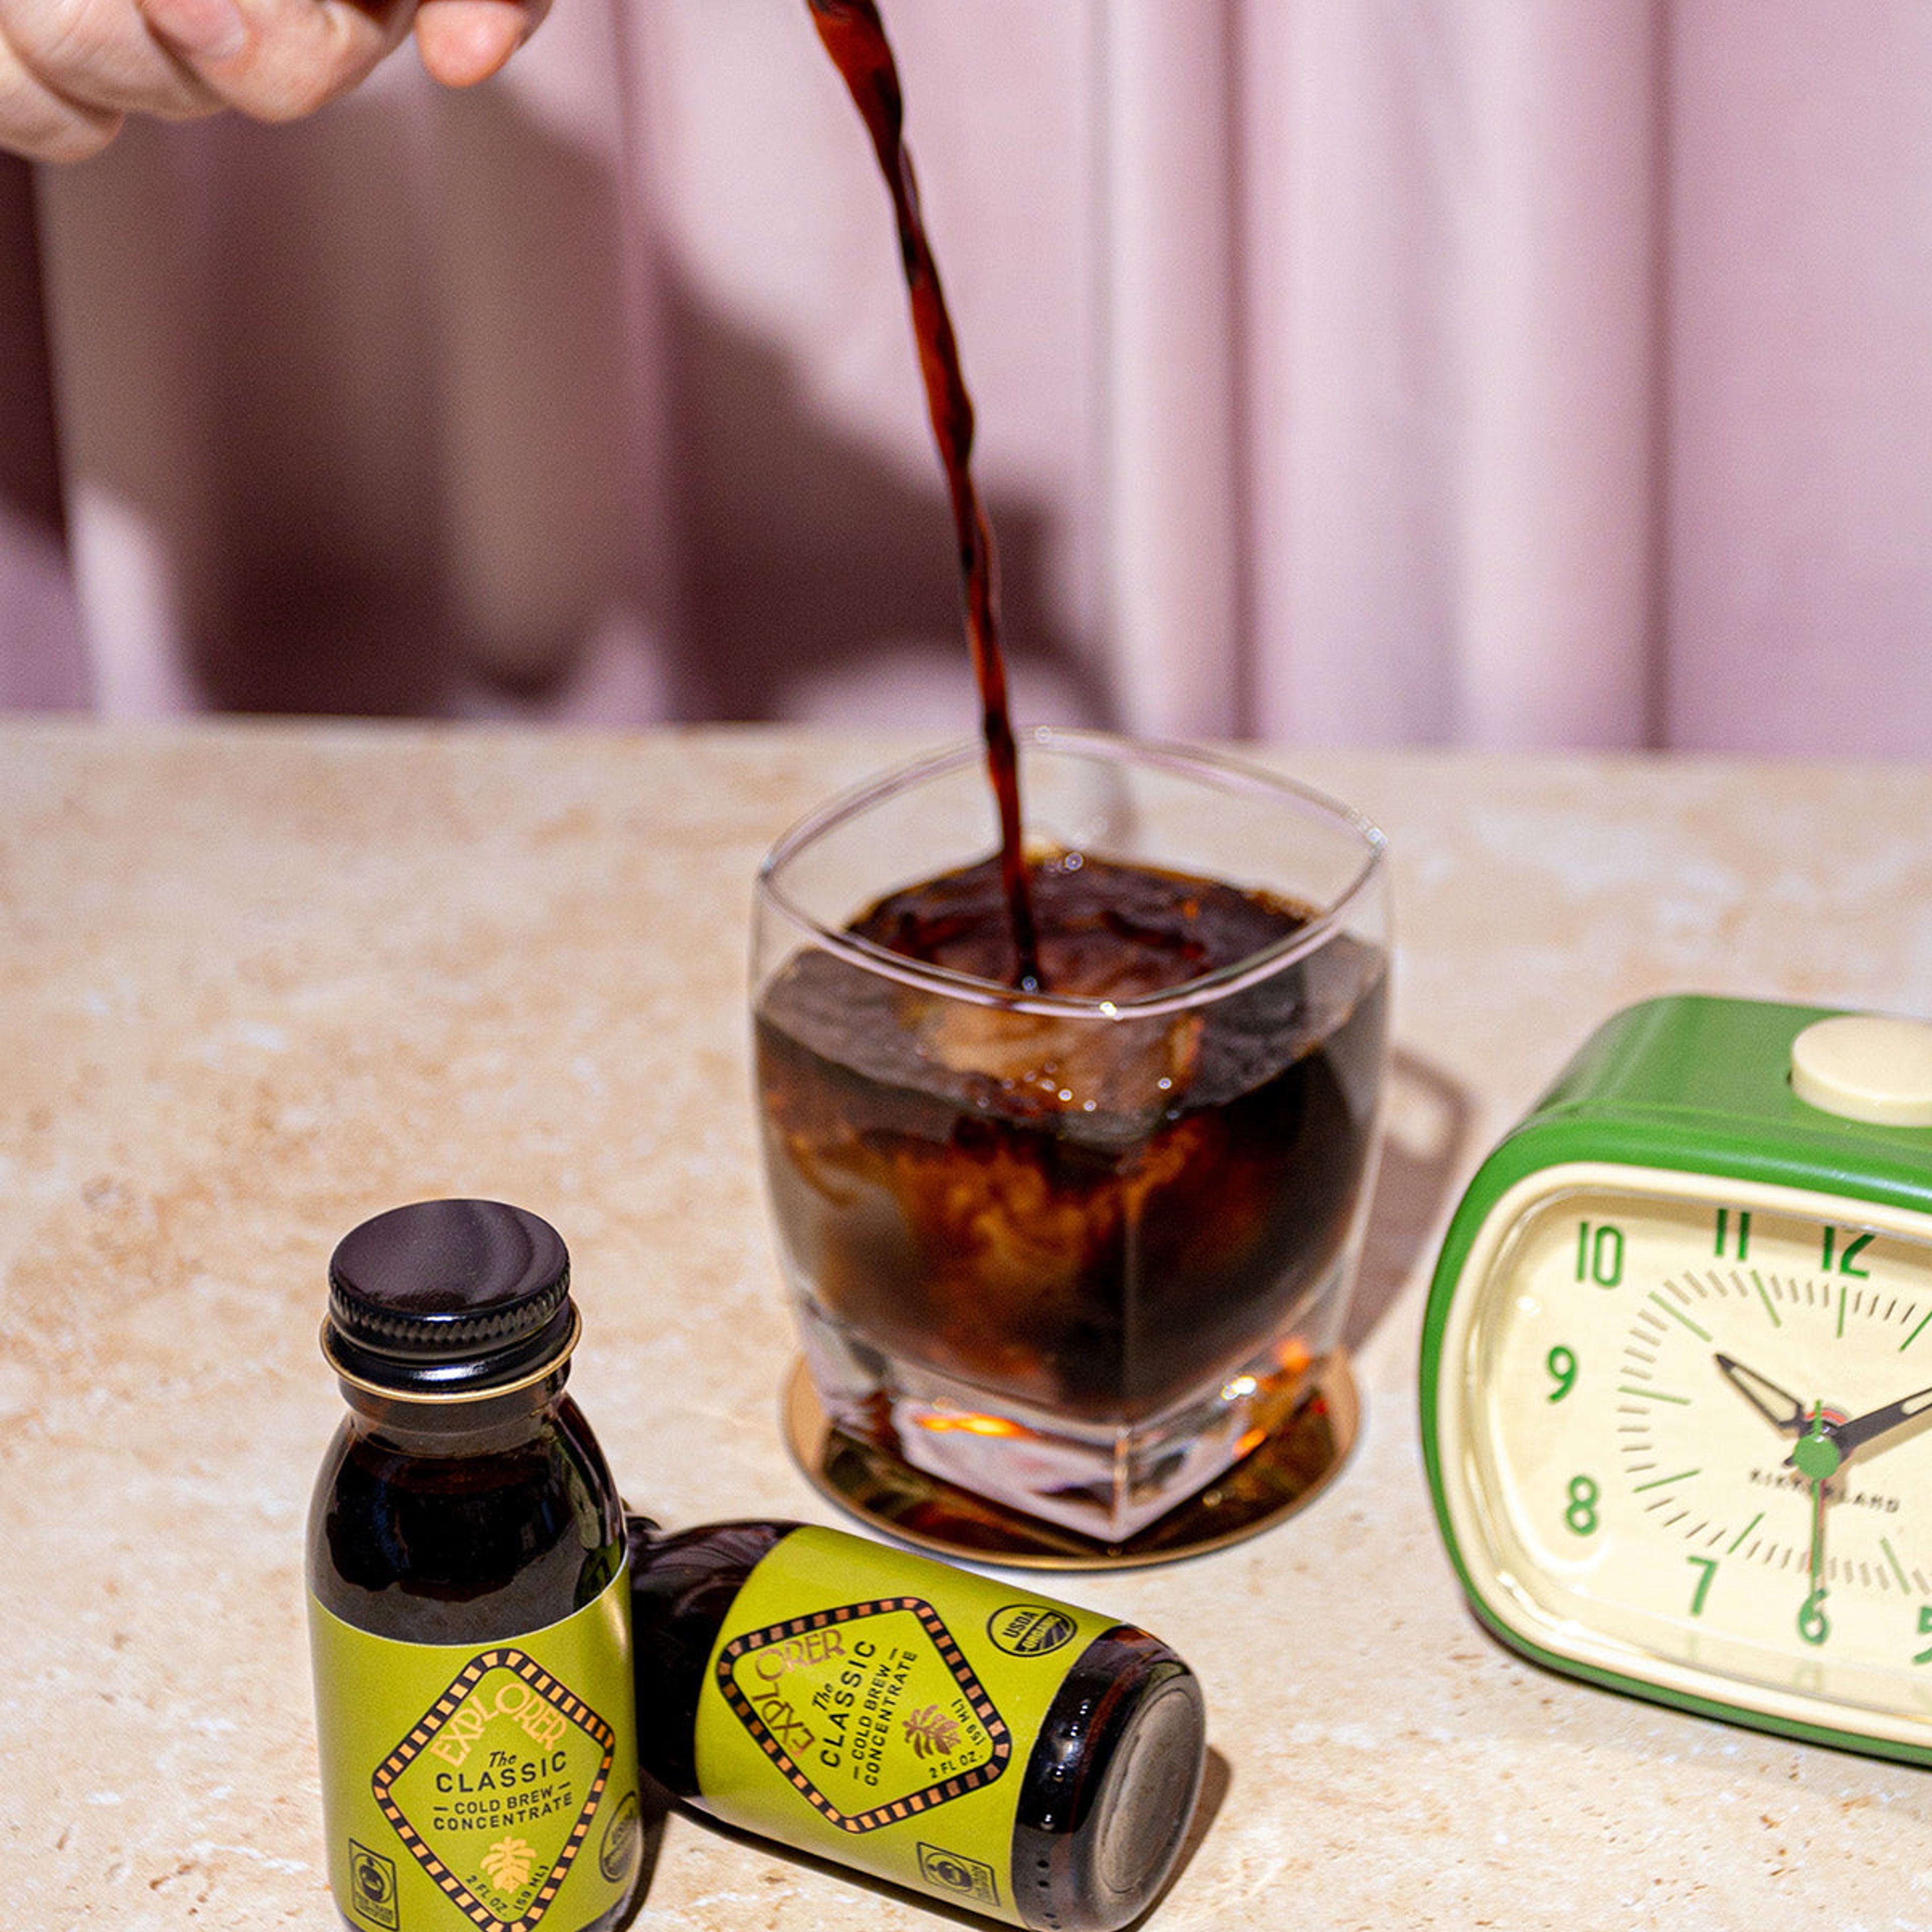 Cold Brew Travel Size